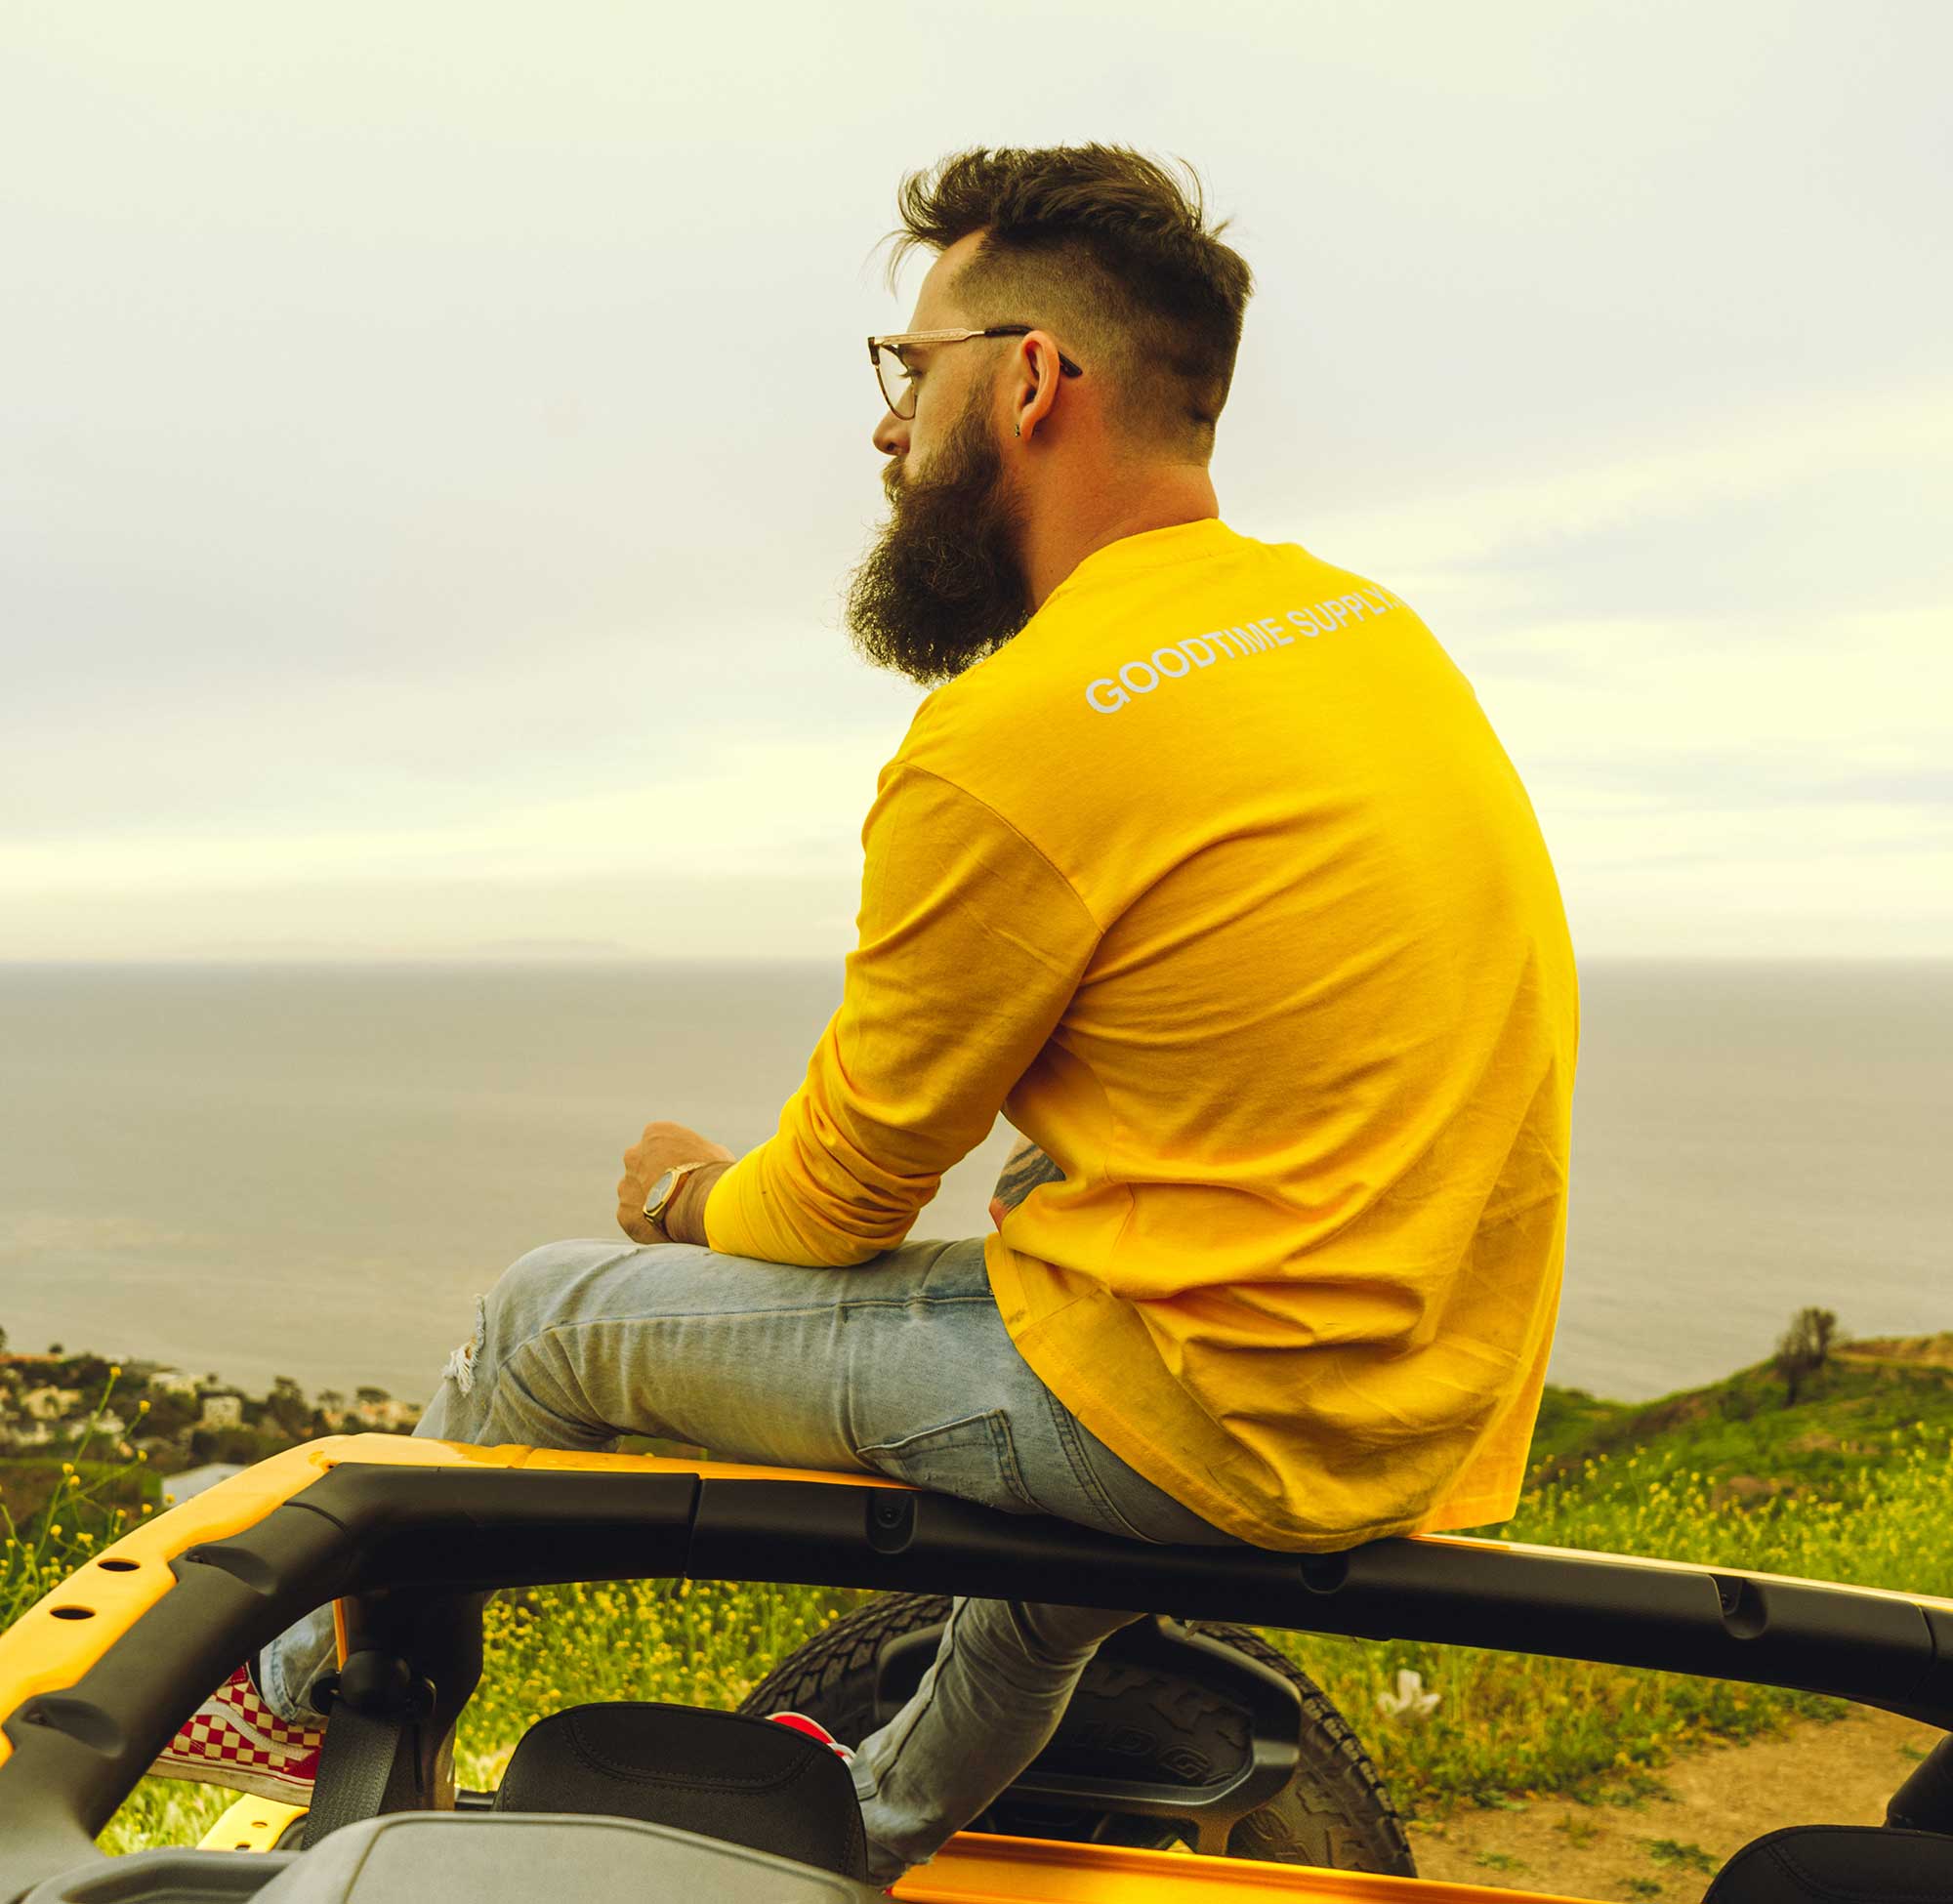 A Man With Glasses Sitting on a Vehicle Looking at the Horizon.